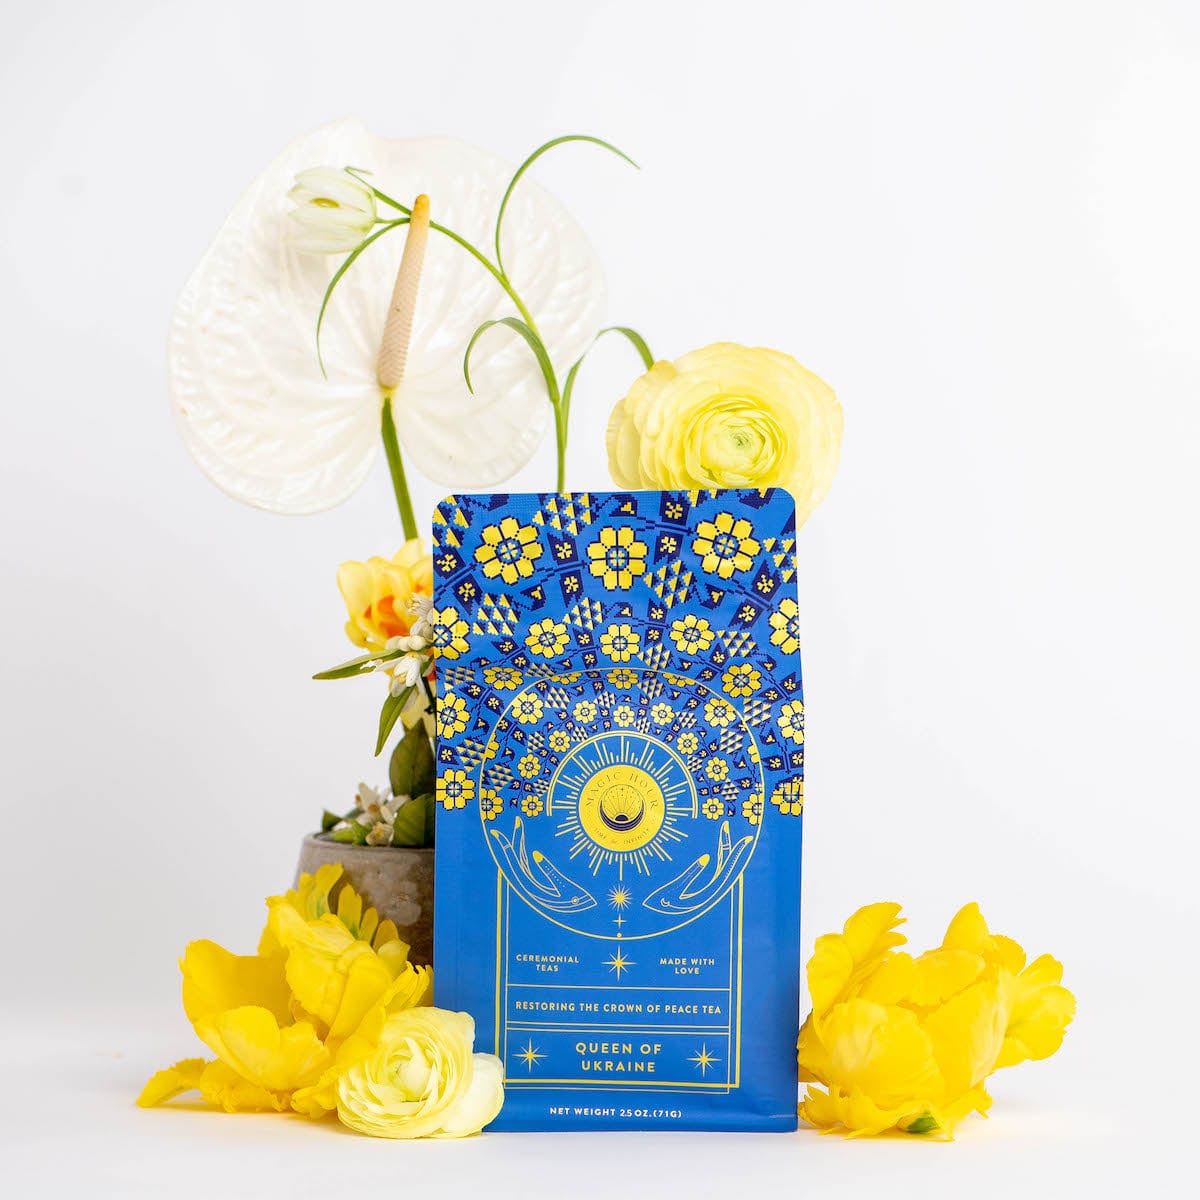 A vibrant blue packet labeled "Magic Hour: Queen of Ukraine: Spring Blossom Tea" with yellow and white floral designs stands against a white background. It is adorned with yellow and white flowers, including roses and anthuriums, enhancing the colorful and elegant presentation of this exquisite loose leaf tea.